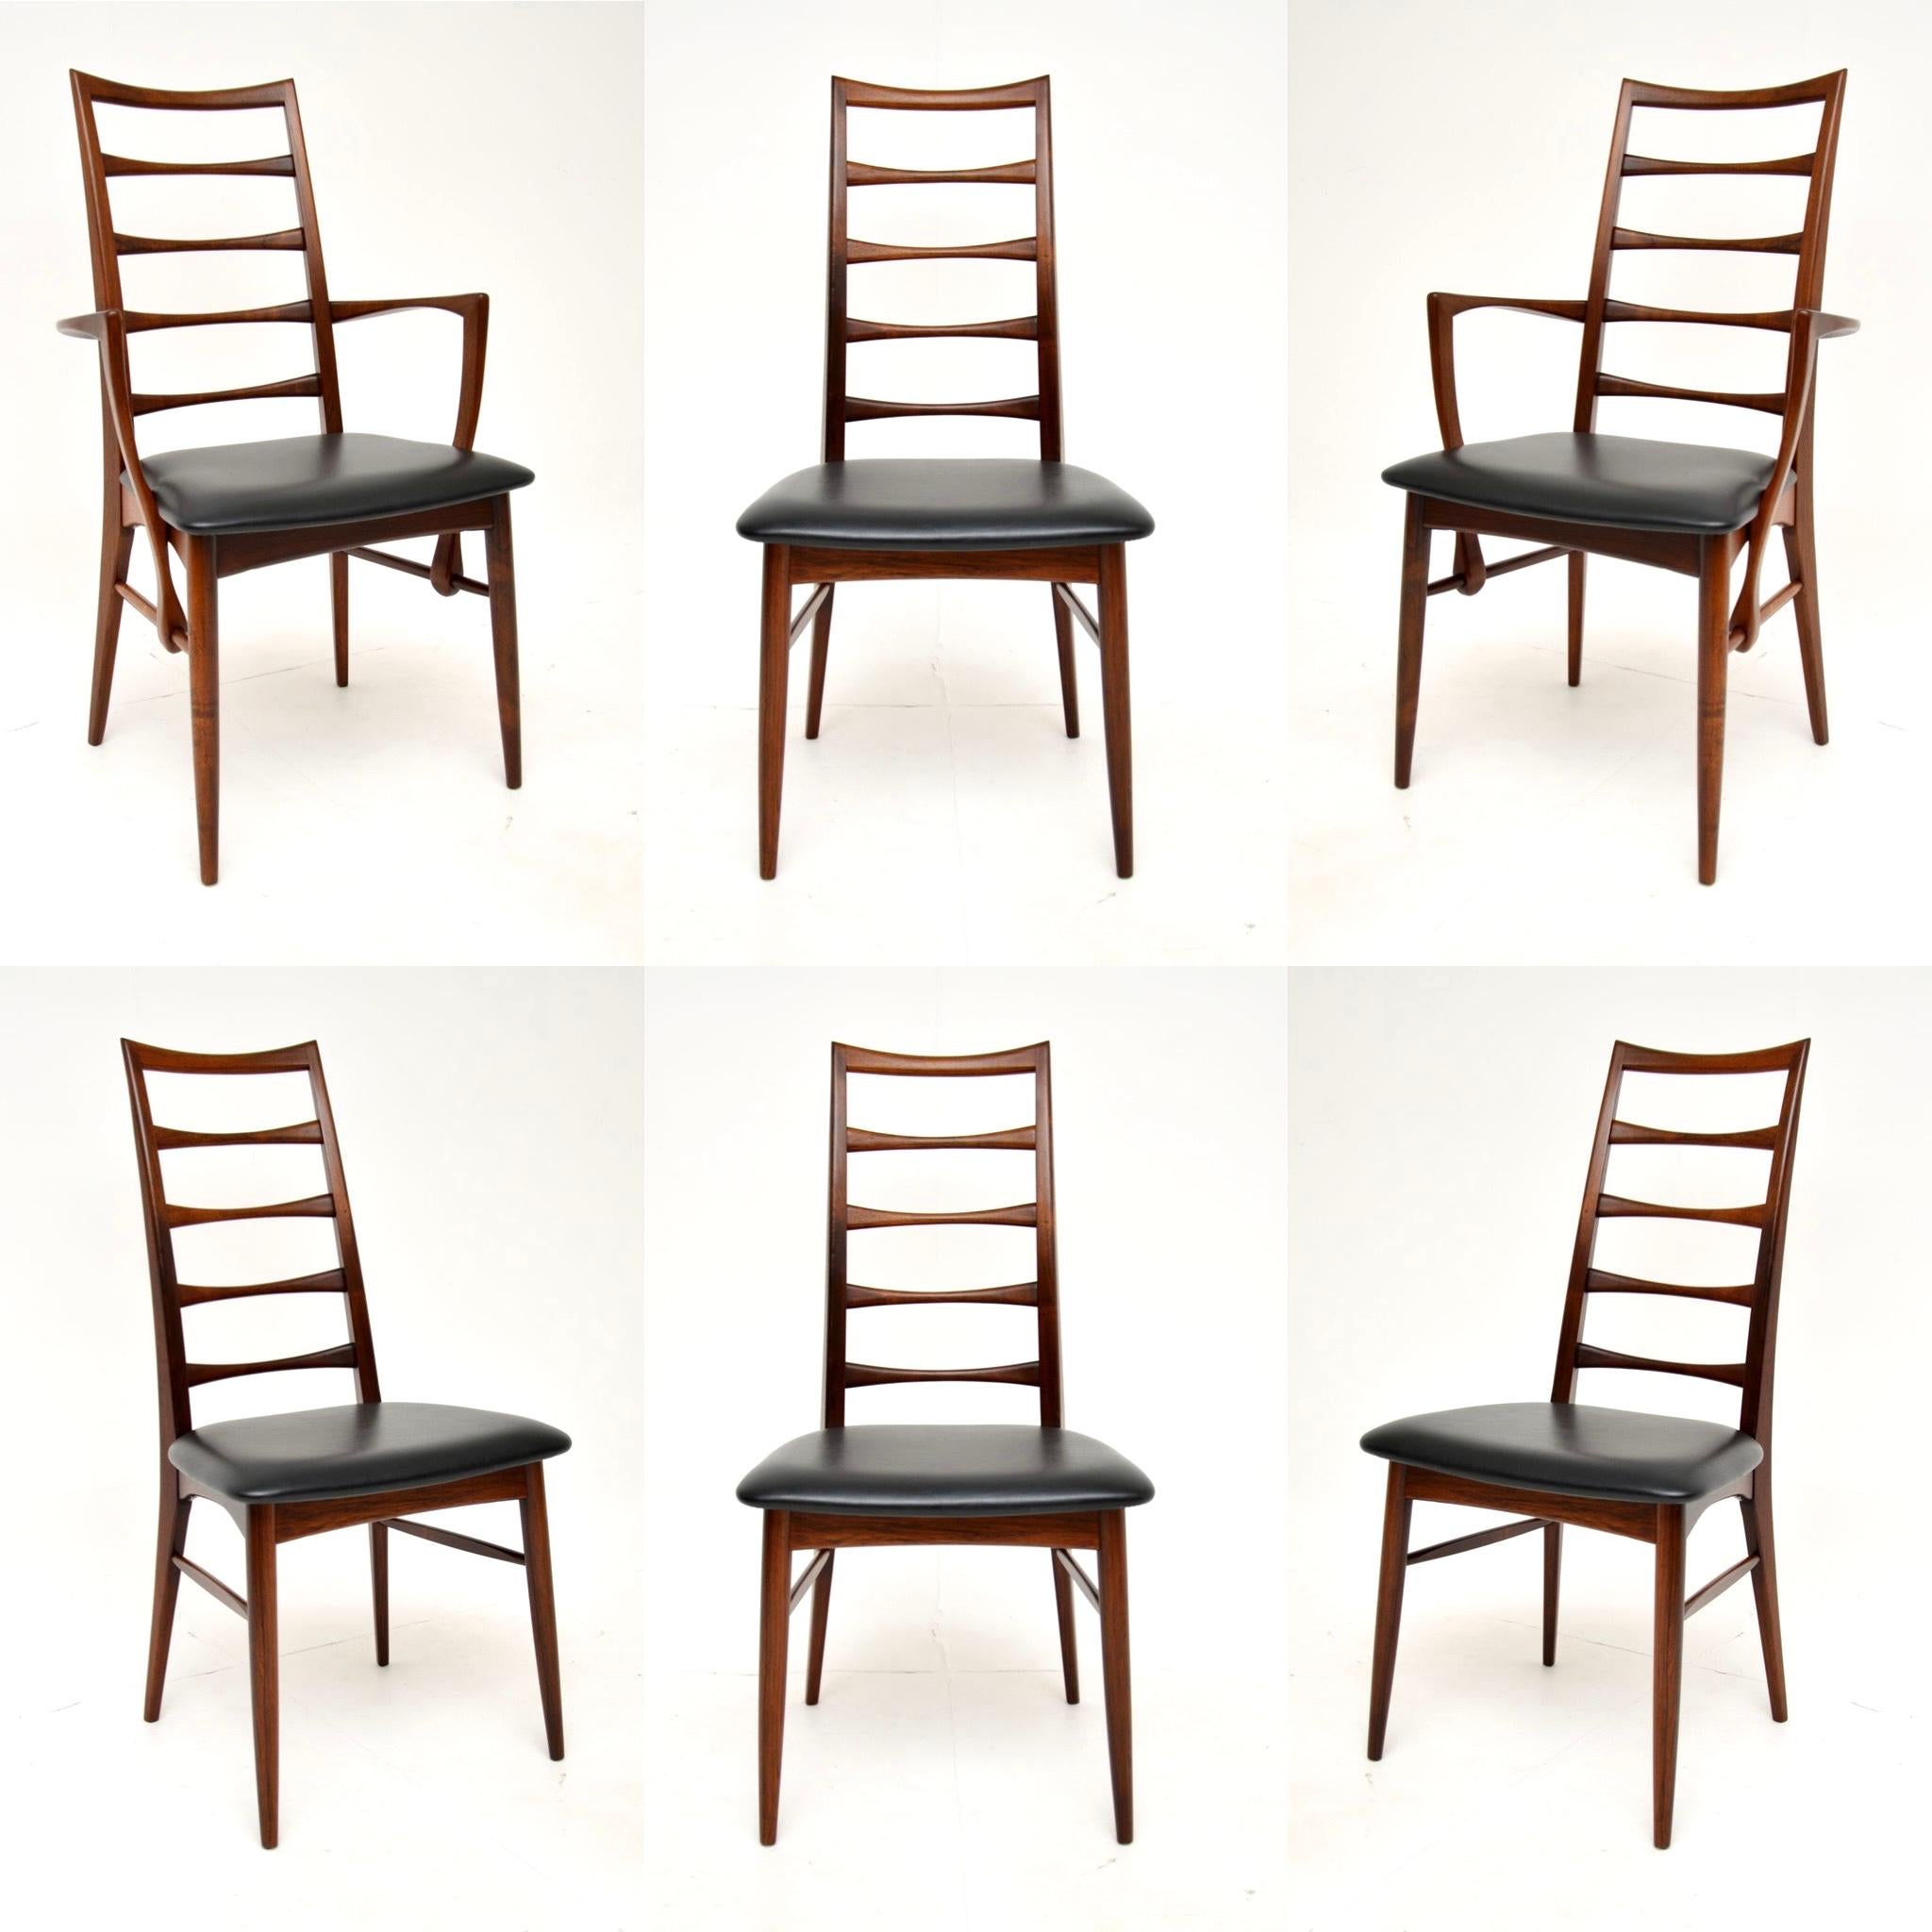 An extremely stylish and very rare set of six Danish wood dining chairs. They were designed by Niels Koefoed and made in Denmark by Koefoed Hornslet in the 1960’s. This model is called the ‘Lis’ chair.

The quality is outstanding, with sculptural